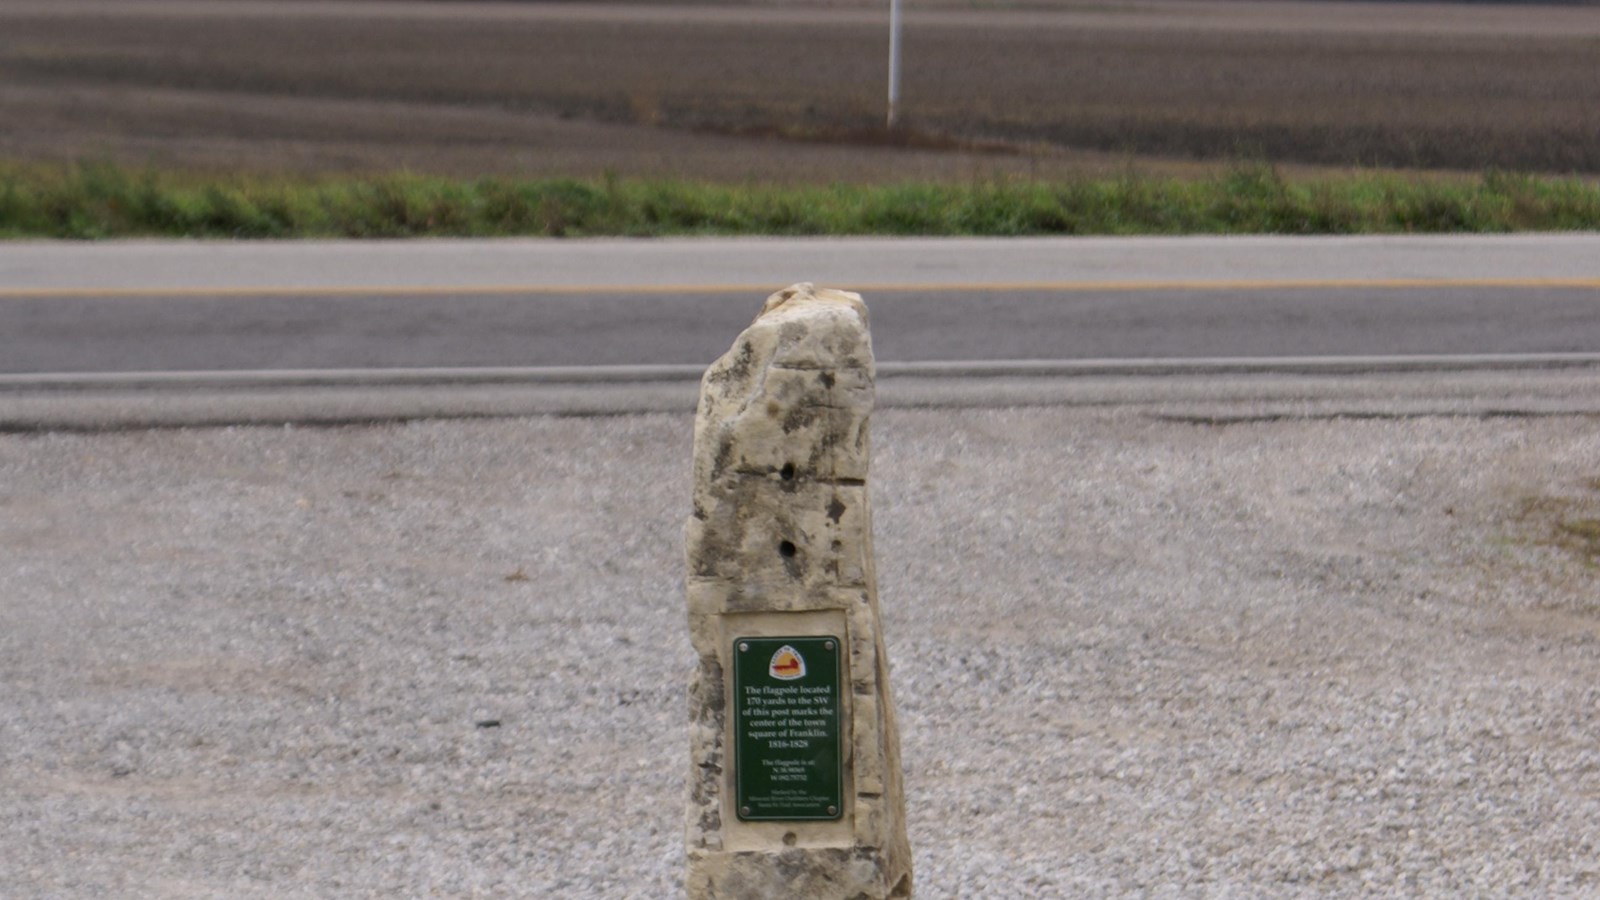 A stone Santa Fe Trail marker with a grassy field in the background